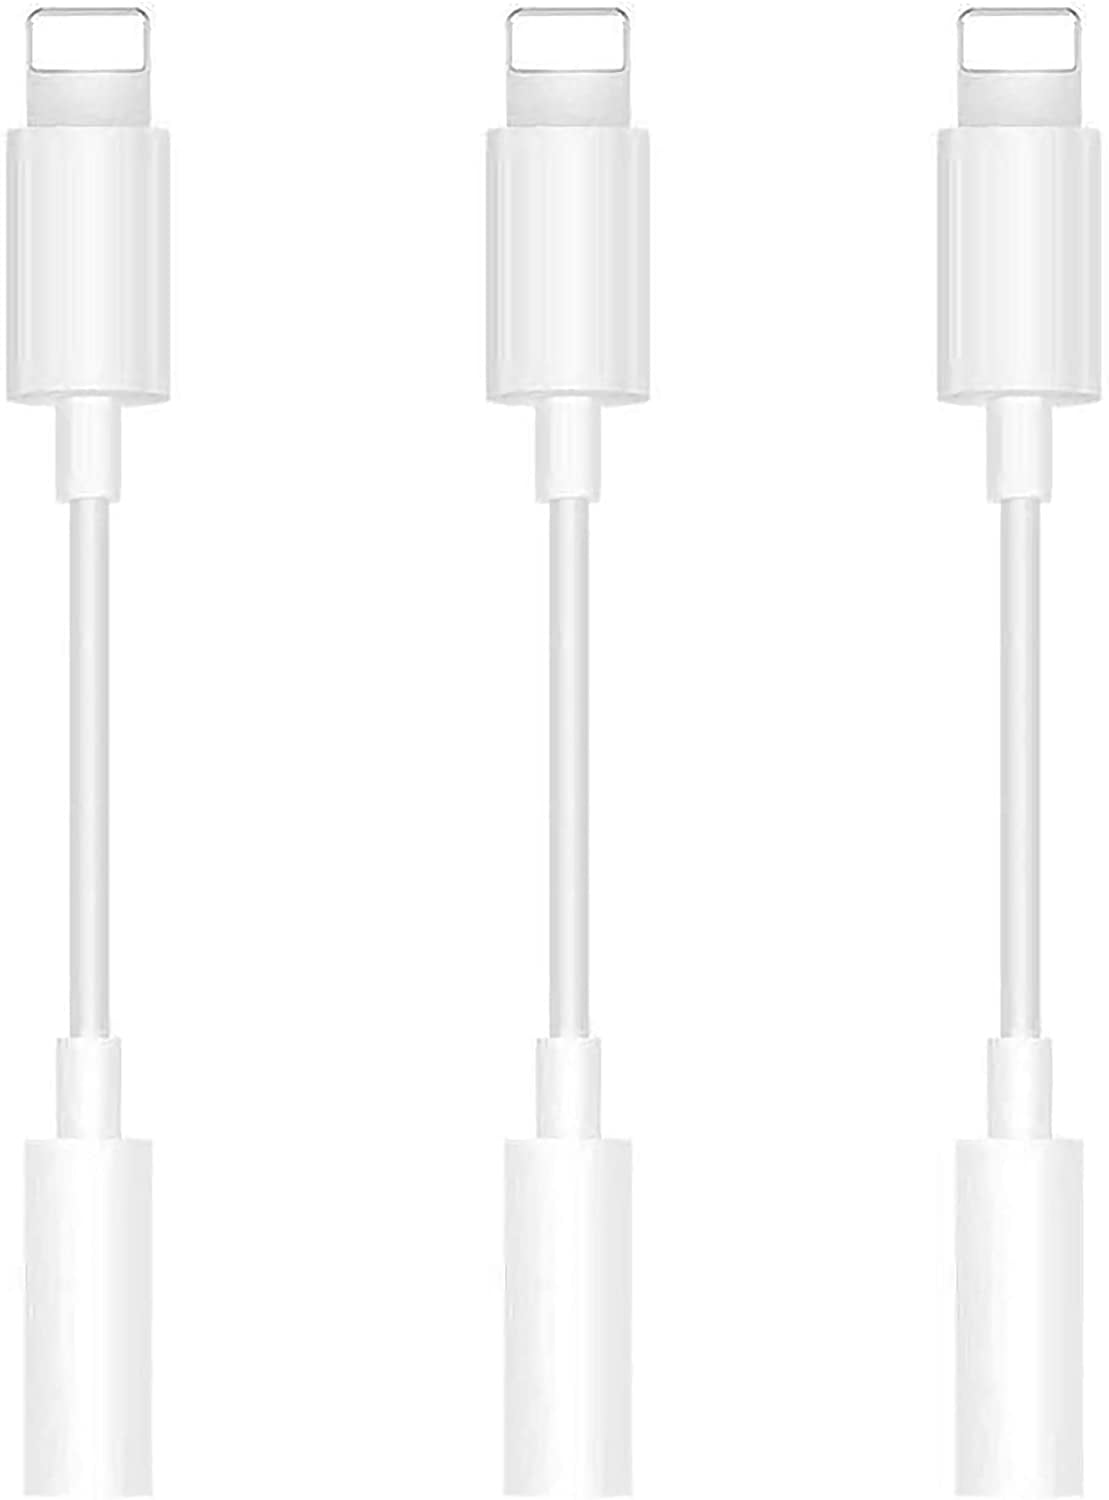 2 Pack Lighting to 3.5 mm Headphone Jack Adapter Earphone Earbuds Adapter Compatible with iPhone 11 Pro/Xs/Xs Max/XR/X/8/8 Plus/7/7 Plus Dongle Adapter 3.5mm AUX Audio Jack Connector White 